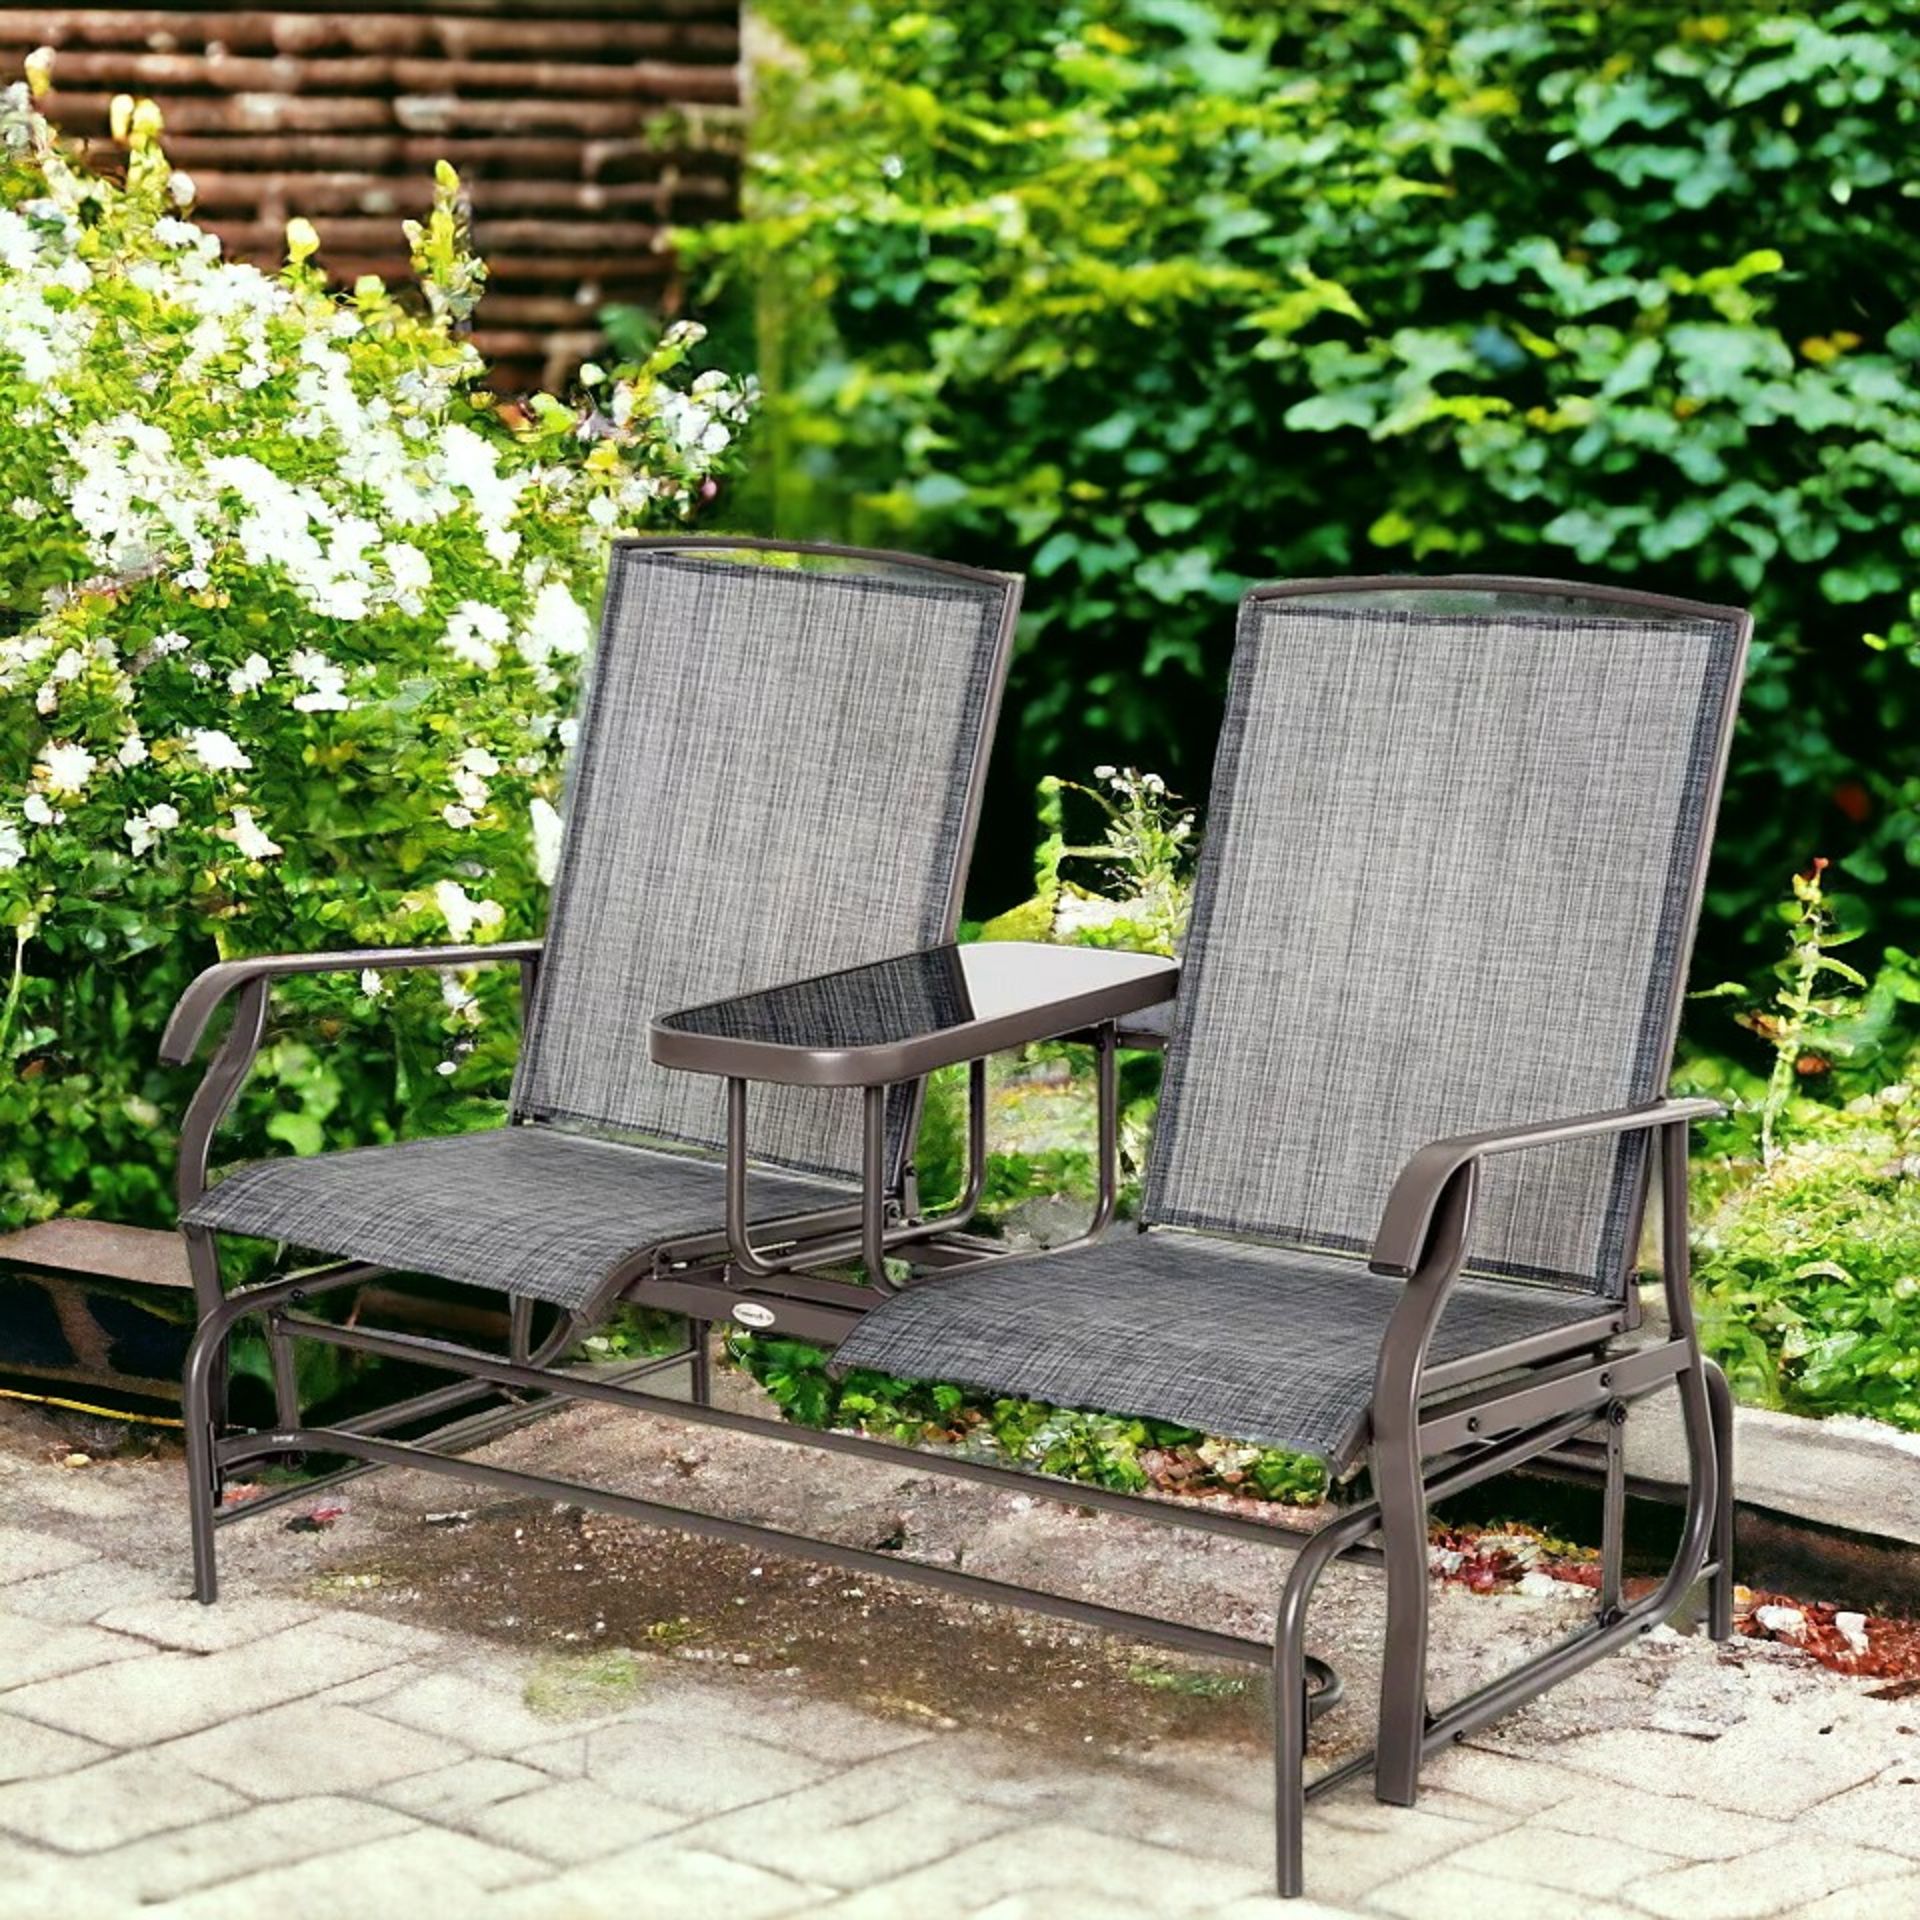 FREE DELIVERY - BRAND NEW 2 SEATER ROCKER DOUBLE ROCKING CHAIR LOUNGER OUTDOOR GARDEN FURNITURE